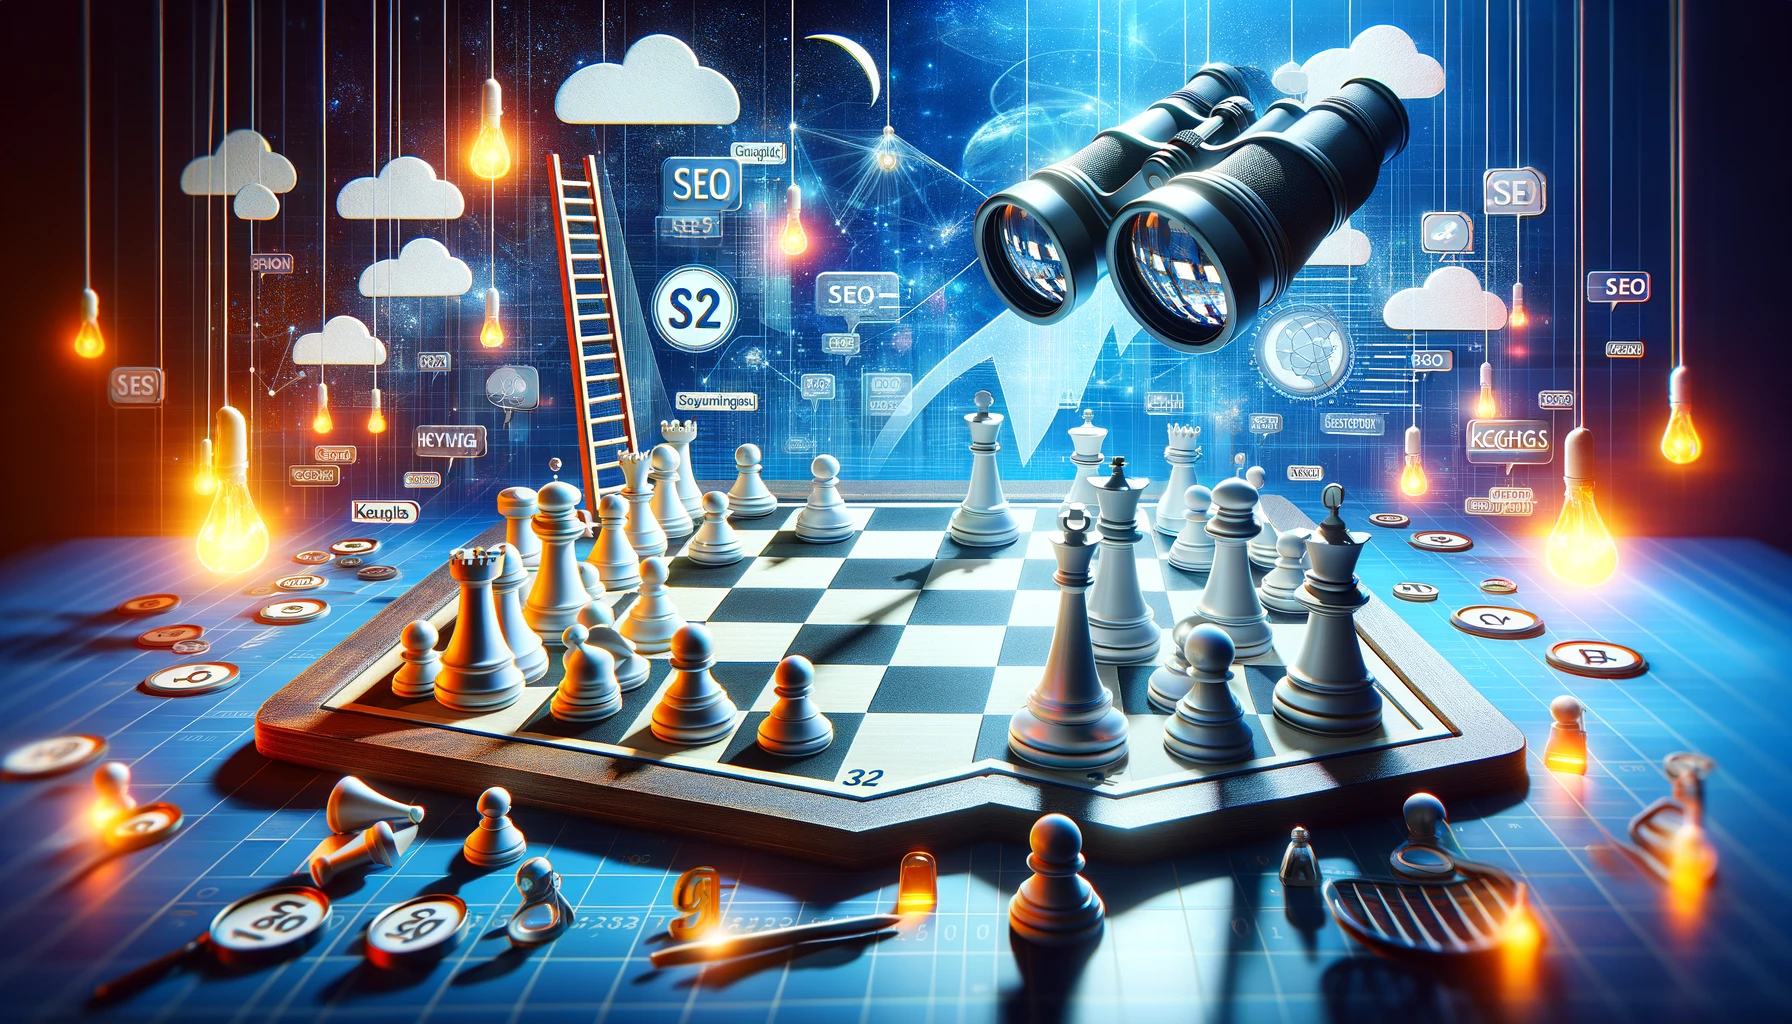 An imaginative representation of keyword ranking strategies with strategic chess pieces on a board and binoculars overlooking a digital landscape, symbolizing the depth of Keyword Ranking Strategies.